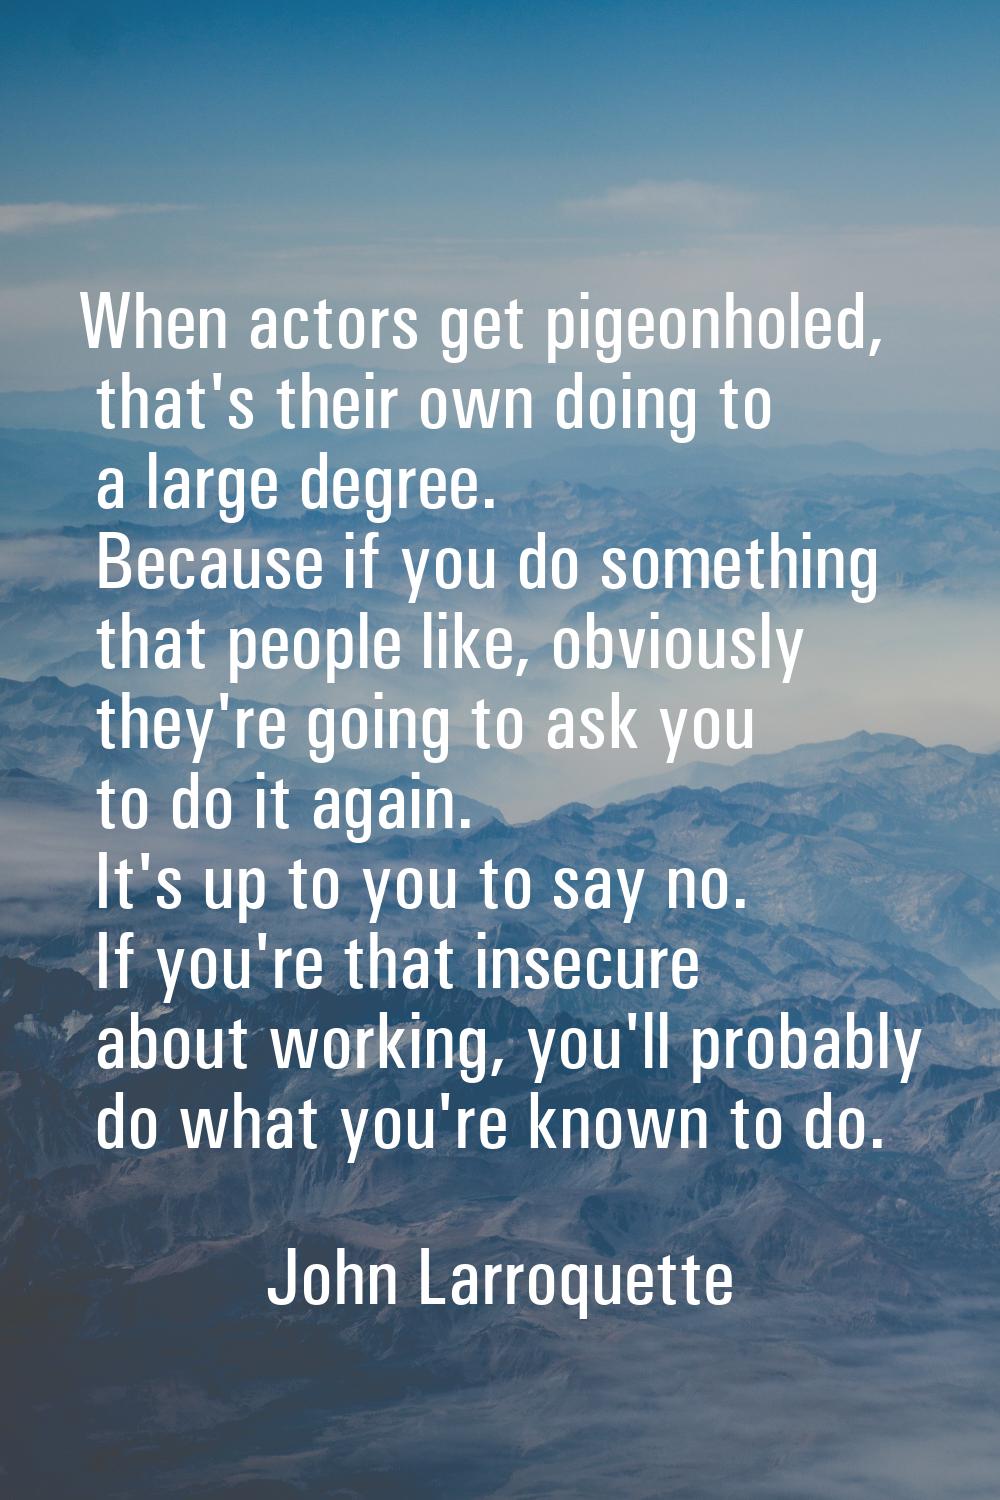 When actors get pigeonholed, that's their own doing to a large degree. Because if you do something 